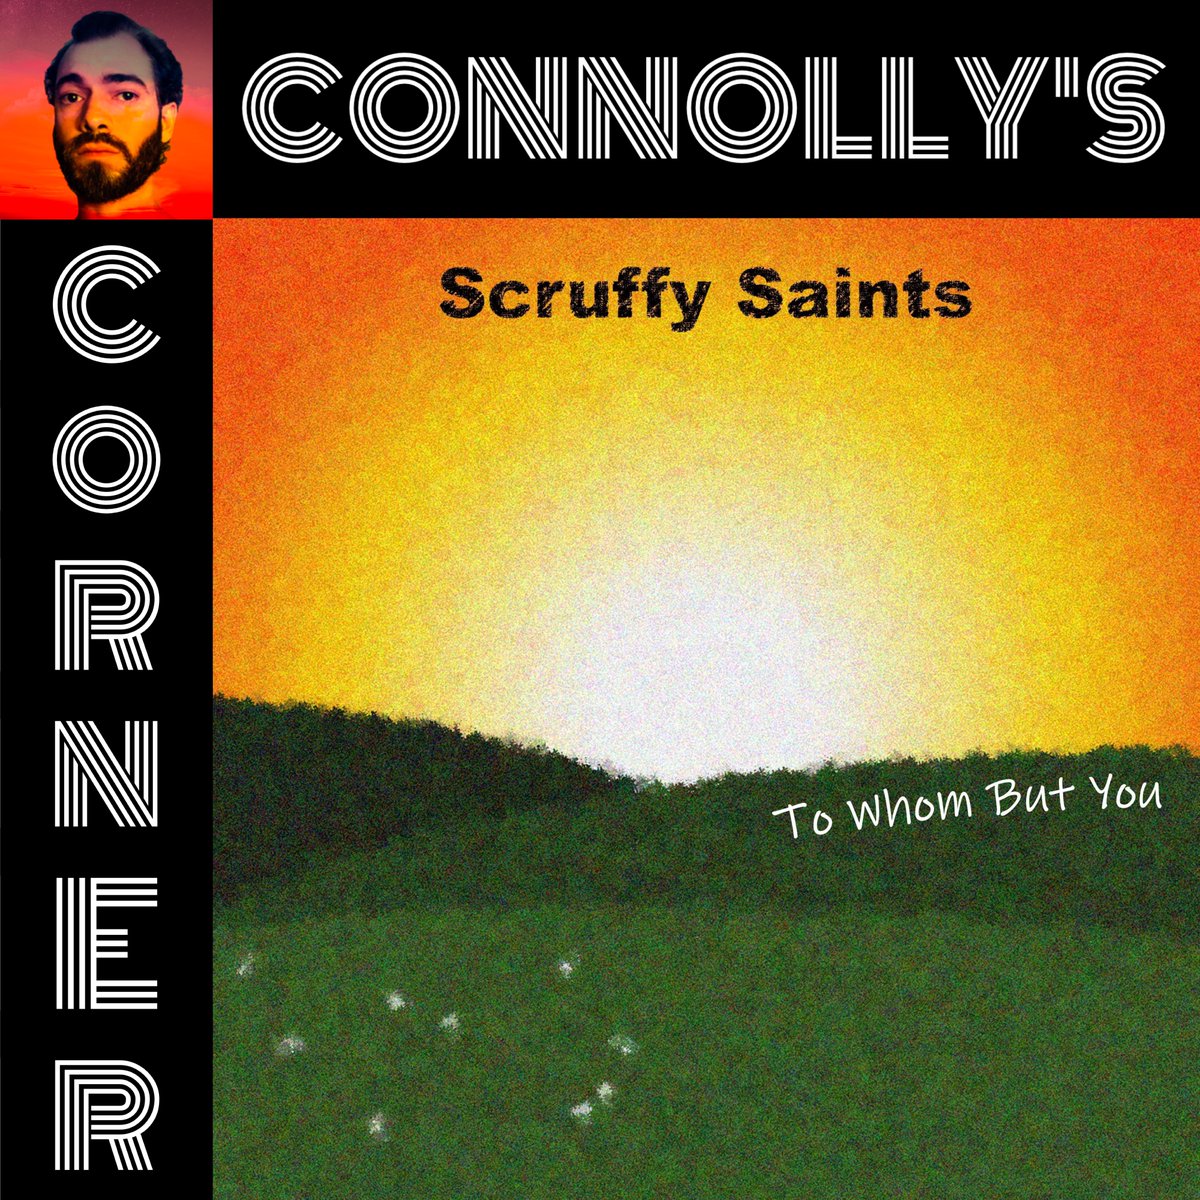 𝗖𝗼𝗻𝗻𝗼𝗹𝗹𝘆’𝘀 𝗖𝗼𝗿𝗻𝗲𝗿: To Whom but You by @ScruffySaints Reviews by @ConnollyTunes Charles begins the resurrection… newartistspotlight.org/post/this-week… #UK #alternative #pop #hymn @alisongoldfrapp @blurofficial @Damonalbarn @grahamcoxon @cspaceduncan #IWantMyNAS #StopPayola